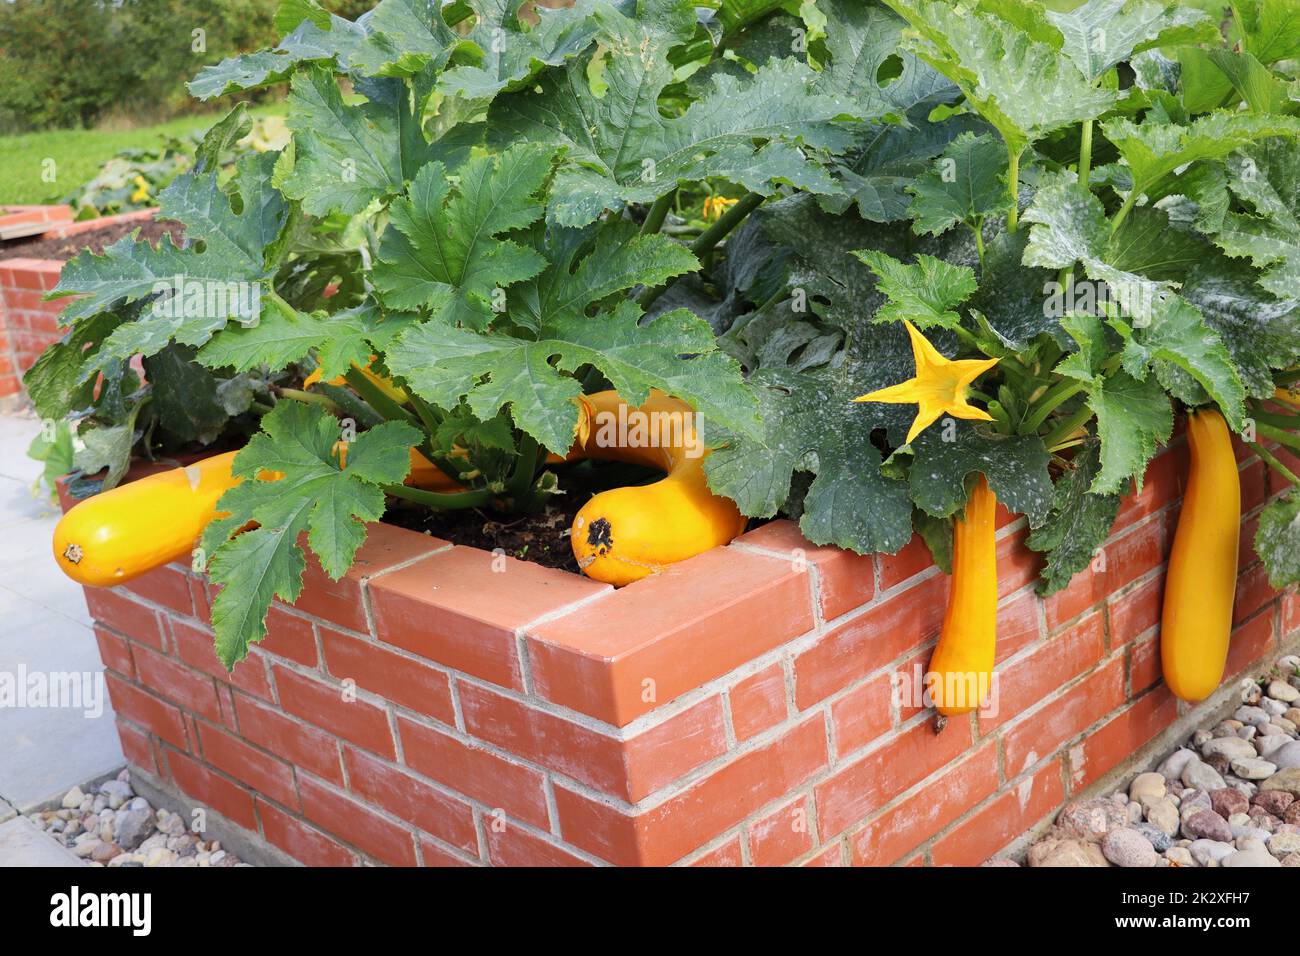 A modern vegetable garden with raised briks beds . .Raised beds gardening in an urban garden growing plants, herbs, spices, berries and vegetables, zucchini Stock Photo